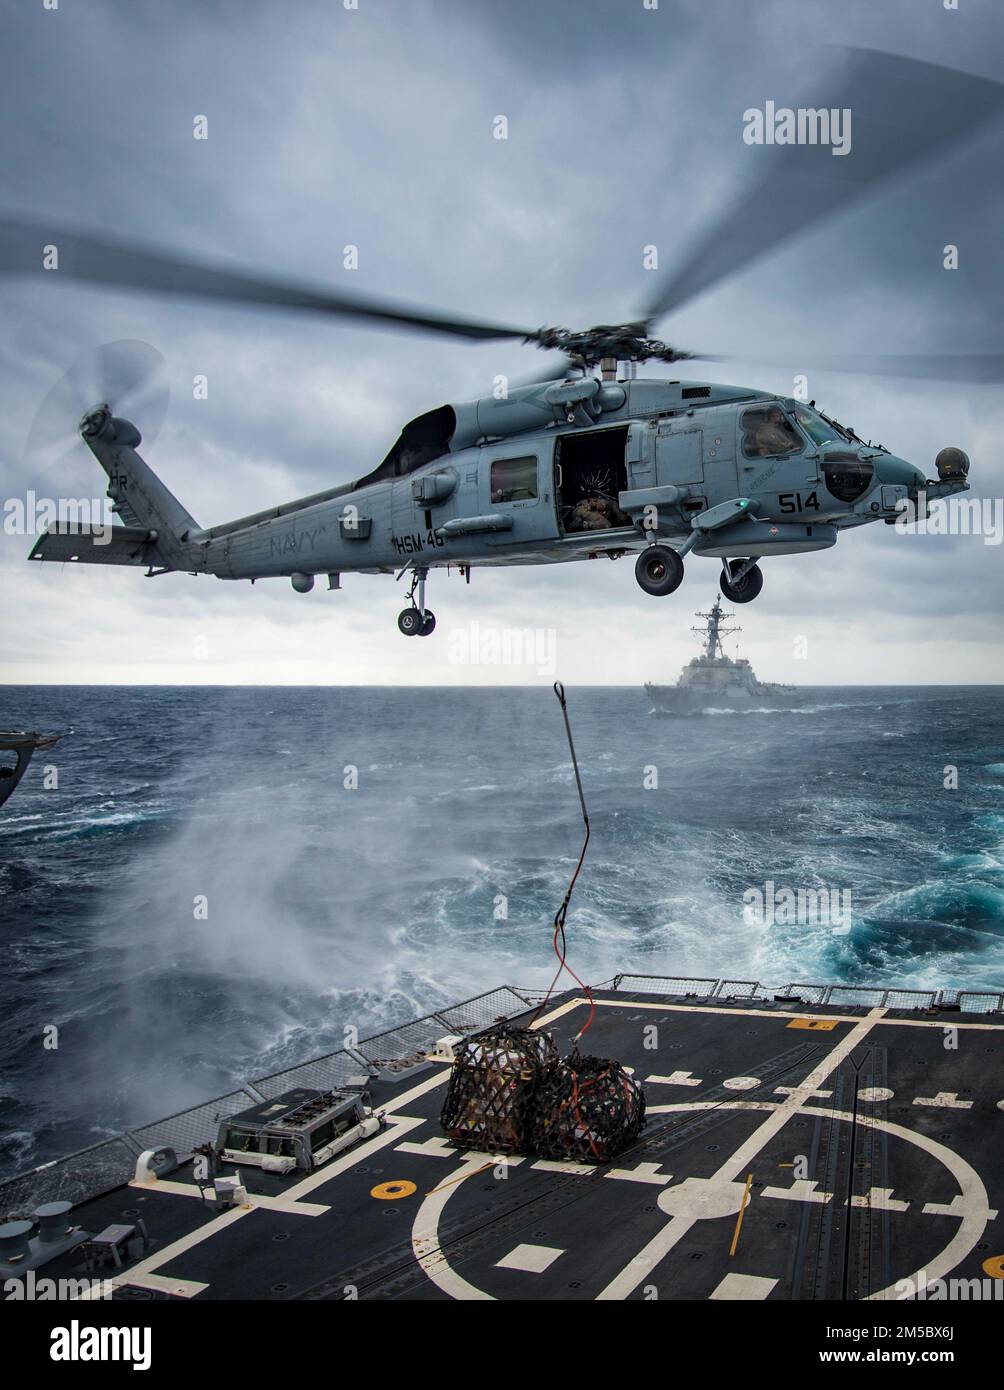 An MH-60R Sea Hawk helicopter, attached to Helicopter Maritime Strike Squadron (HSM) 48, delivers supplies to the guided-missile destroyer USS Delbert D. Black (DGG 119) during a vertical replenishment at sea with the replenishment oiler USNS John Lenthall (T-AO-189) while underway for Surface Warfare Advanced Tactical Training (SWATT). Delbert D. Black is part of Destroyer Squadron (DESRON) 26 which supports Carrier Strike Group (CSG) 10. SWATT is led by the Naval Surface and Mine Warfighting Development Center (SMWDC) and is designed to increase warfighting proficiency, lethality, and intero Stock Photo